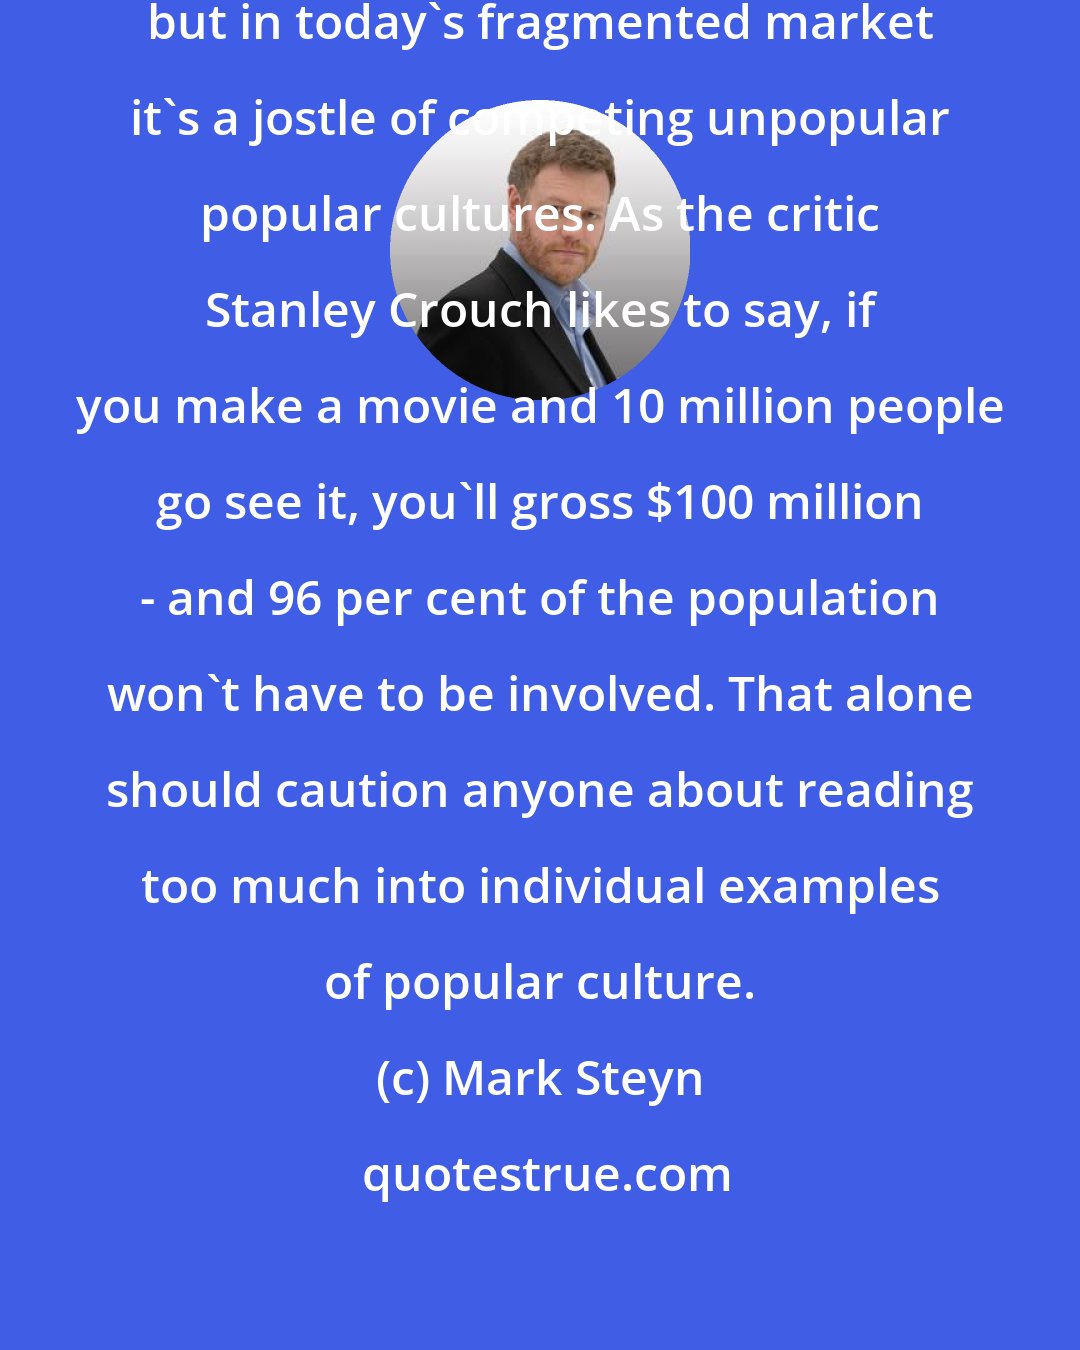 Mark Steyn: Popular culture as a whole is popular, but in today's fragmented market it's a jostle of competing unpopular popular cultures. As the critic Stanley Crouch likes to say, if you make a movie and 10 million people go see it, you'll gross $100 million - and 96 per cent of the population won't have to be involved. That alone should caution anyone about reading too much into individual examples of popular culture.